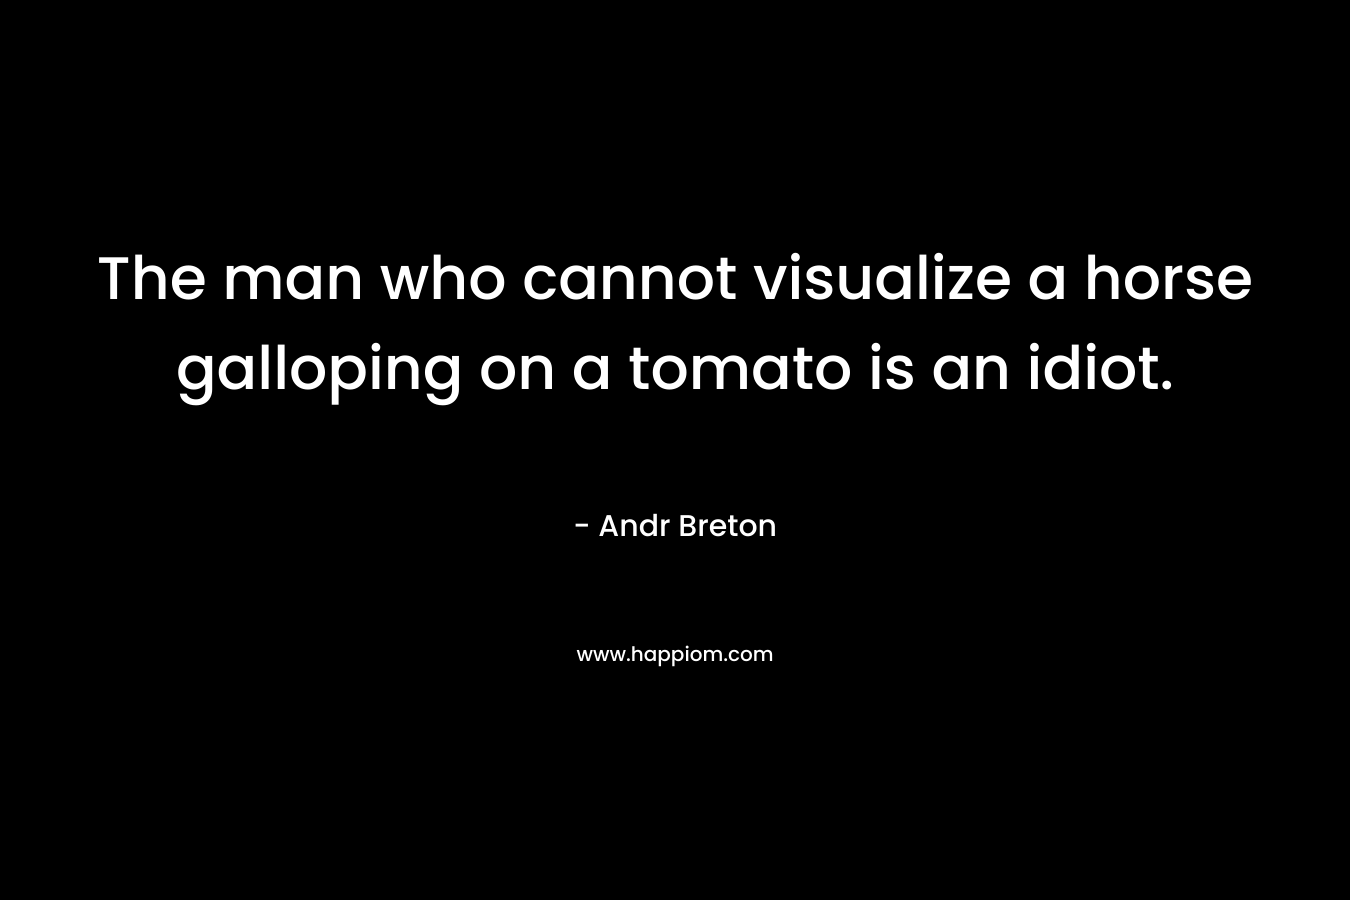 The man who cannot visualize a horse galloping on a tomato is an idiot. – Andr Breton